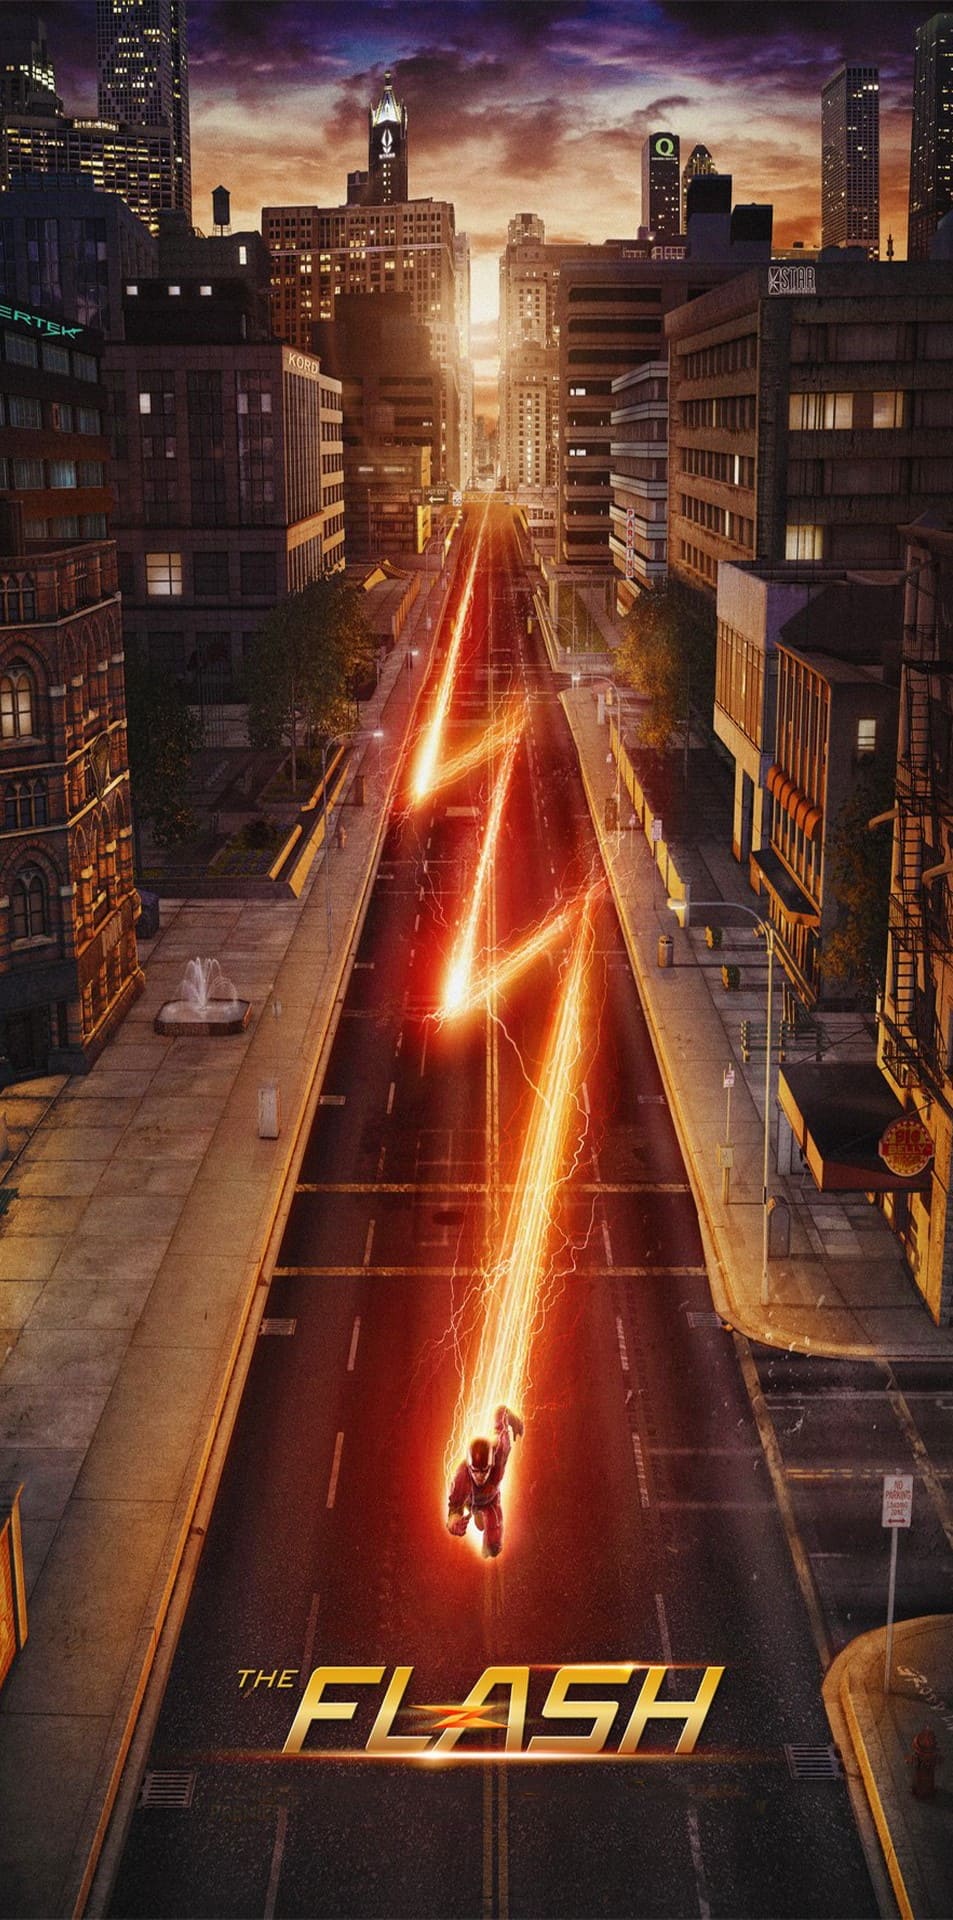 The Flash HD Wallpaper For IPhone